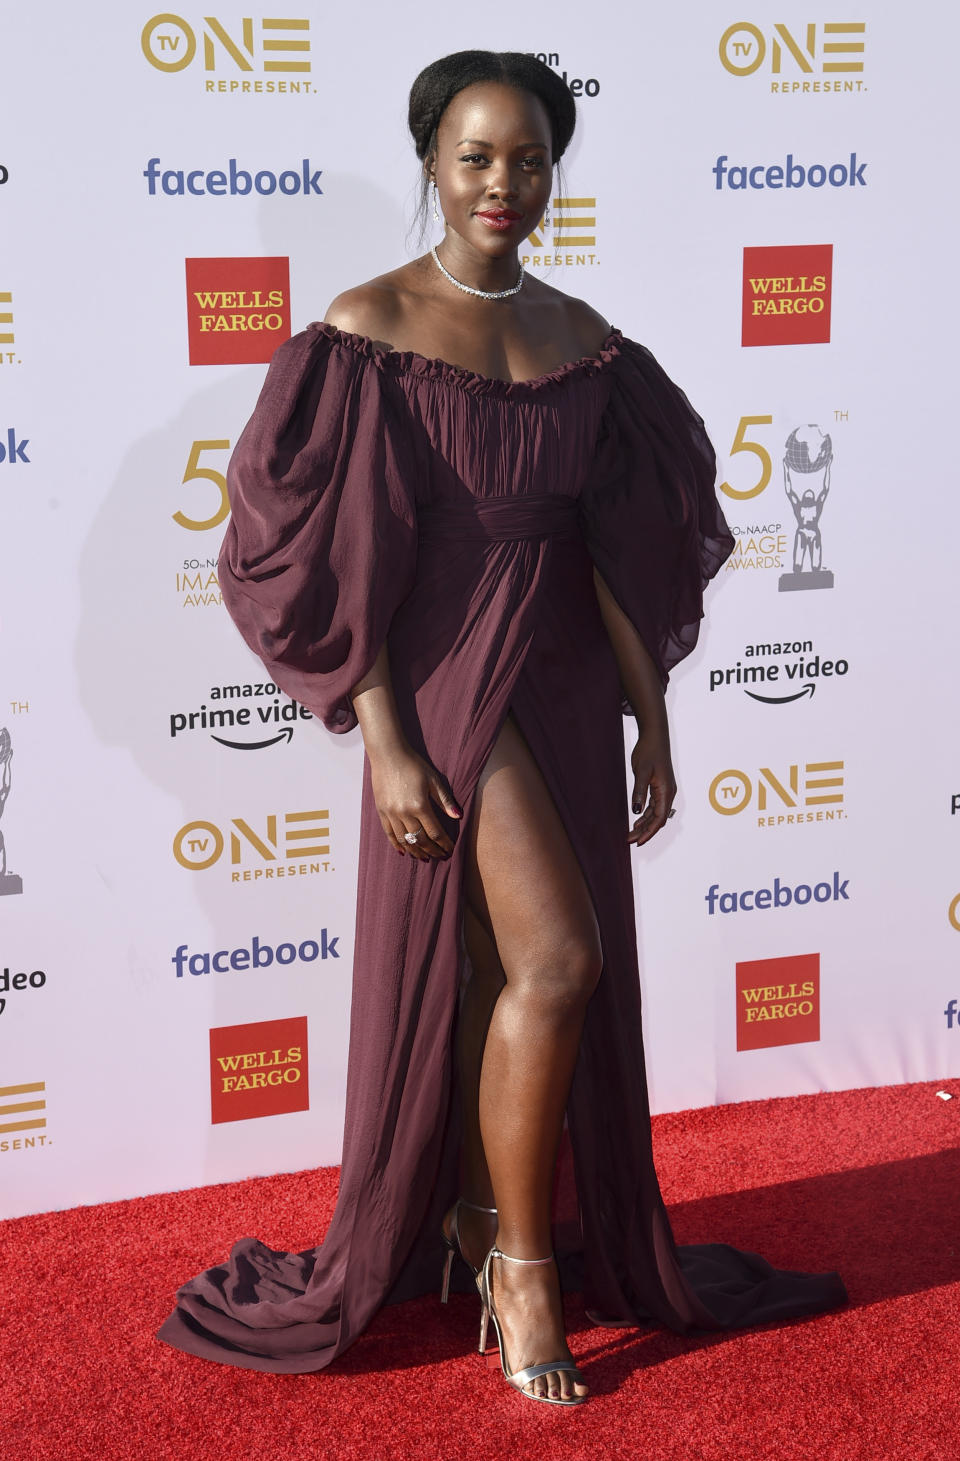 Lupita Nyong'o arrives at the 50th annual NAACP Image Awards on Saturday, March 30, 2019, at the Dolby Theatre in Los Angeles. (Photo by Richard Shotwell/Invision/AP)